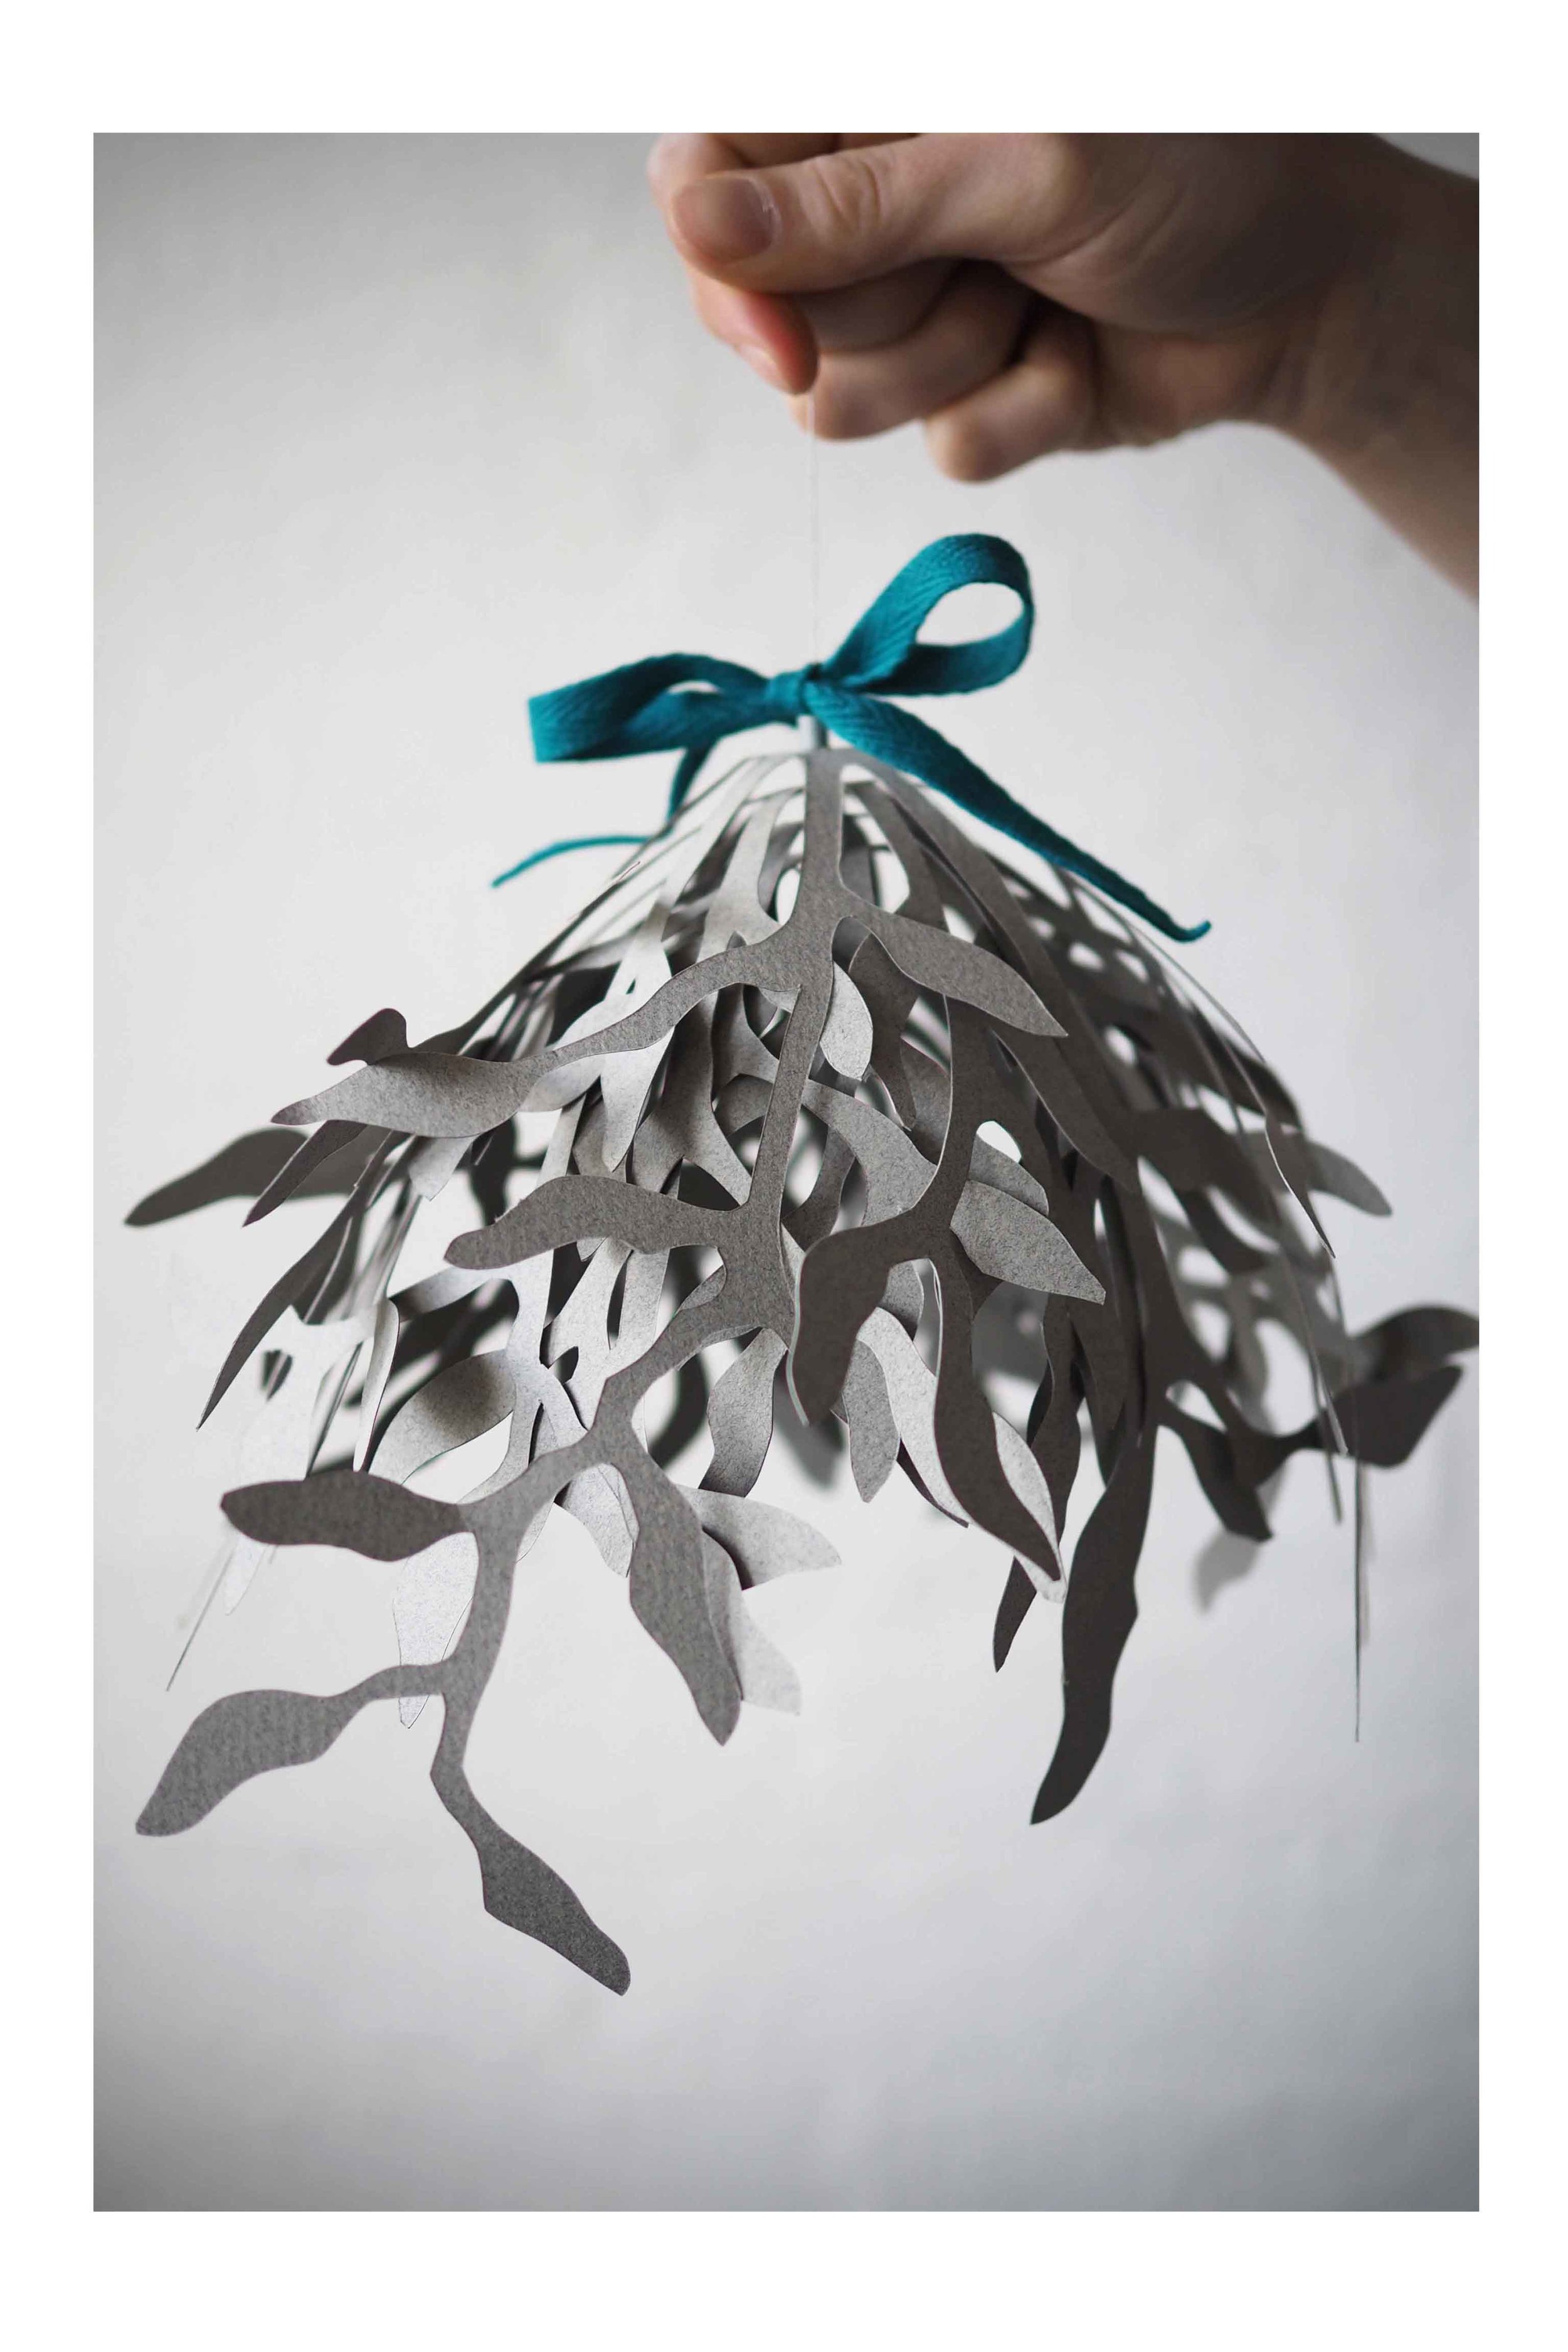  The 3D Winter / Christmas `Mistletoe´ decoration self-assembly kit,&nbsp;comes in a A4 size folder and includes:  Paper arks with ready-to-use elements made of 175 g sturdy paper FSC and ECF certified,&nbsp;100% natural silk string,&nbsp;beads and s